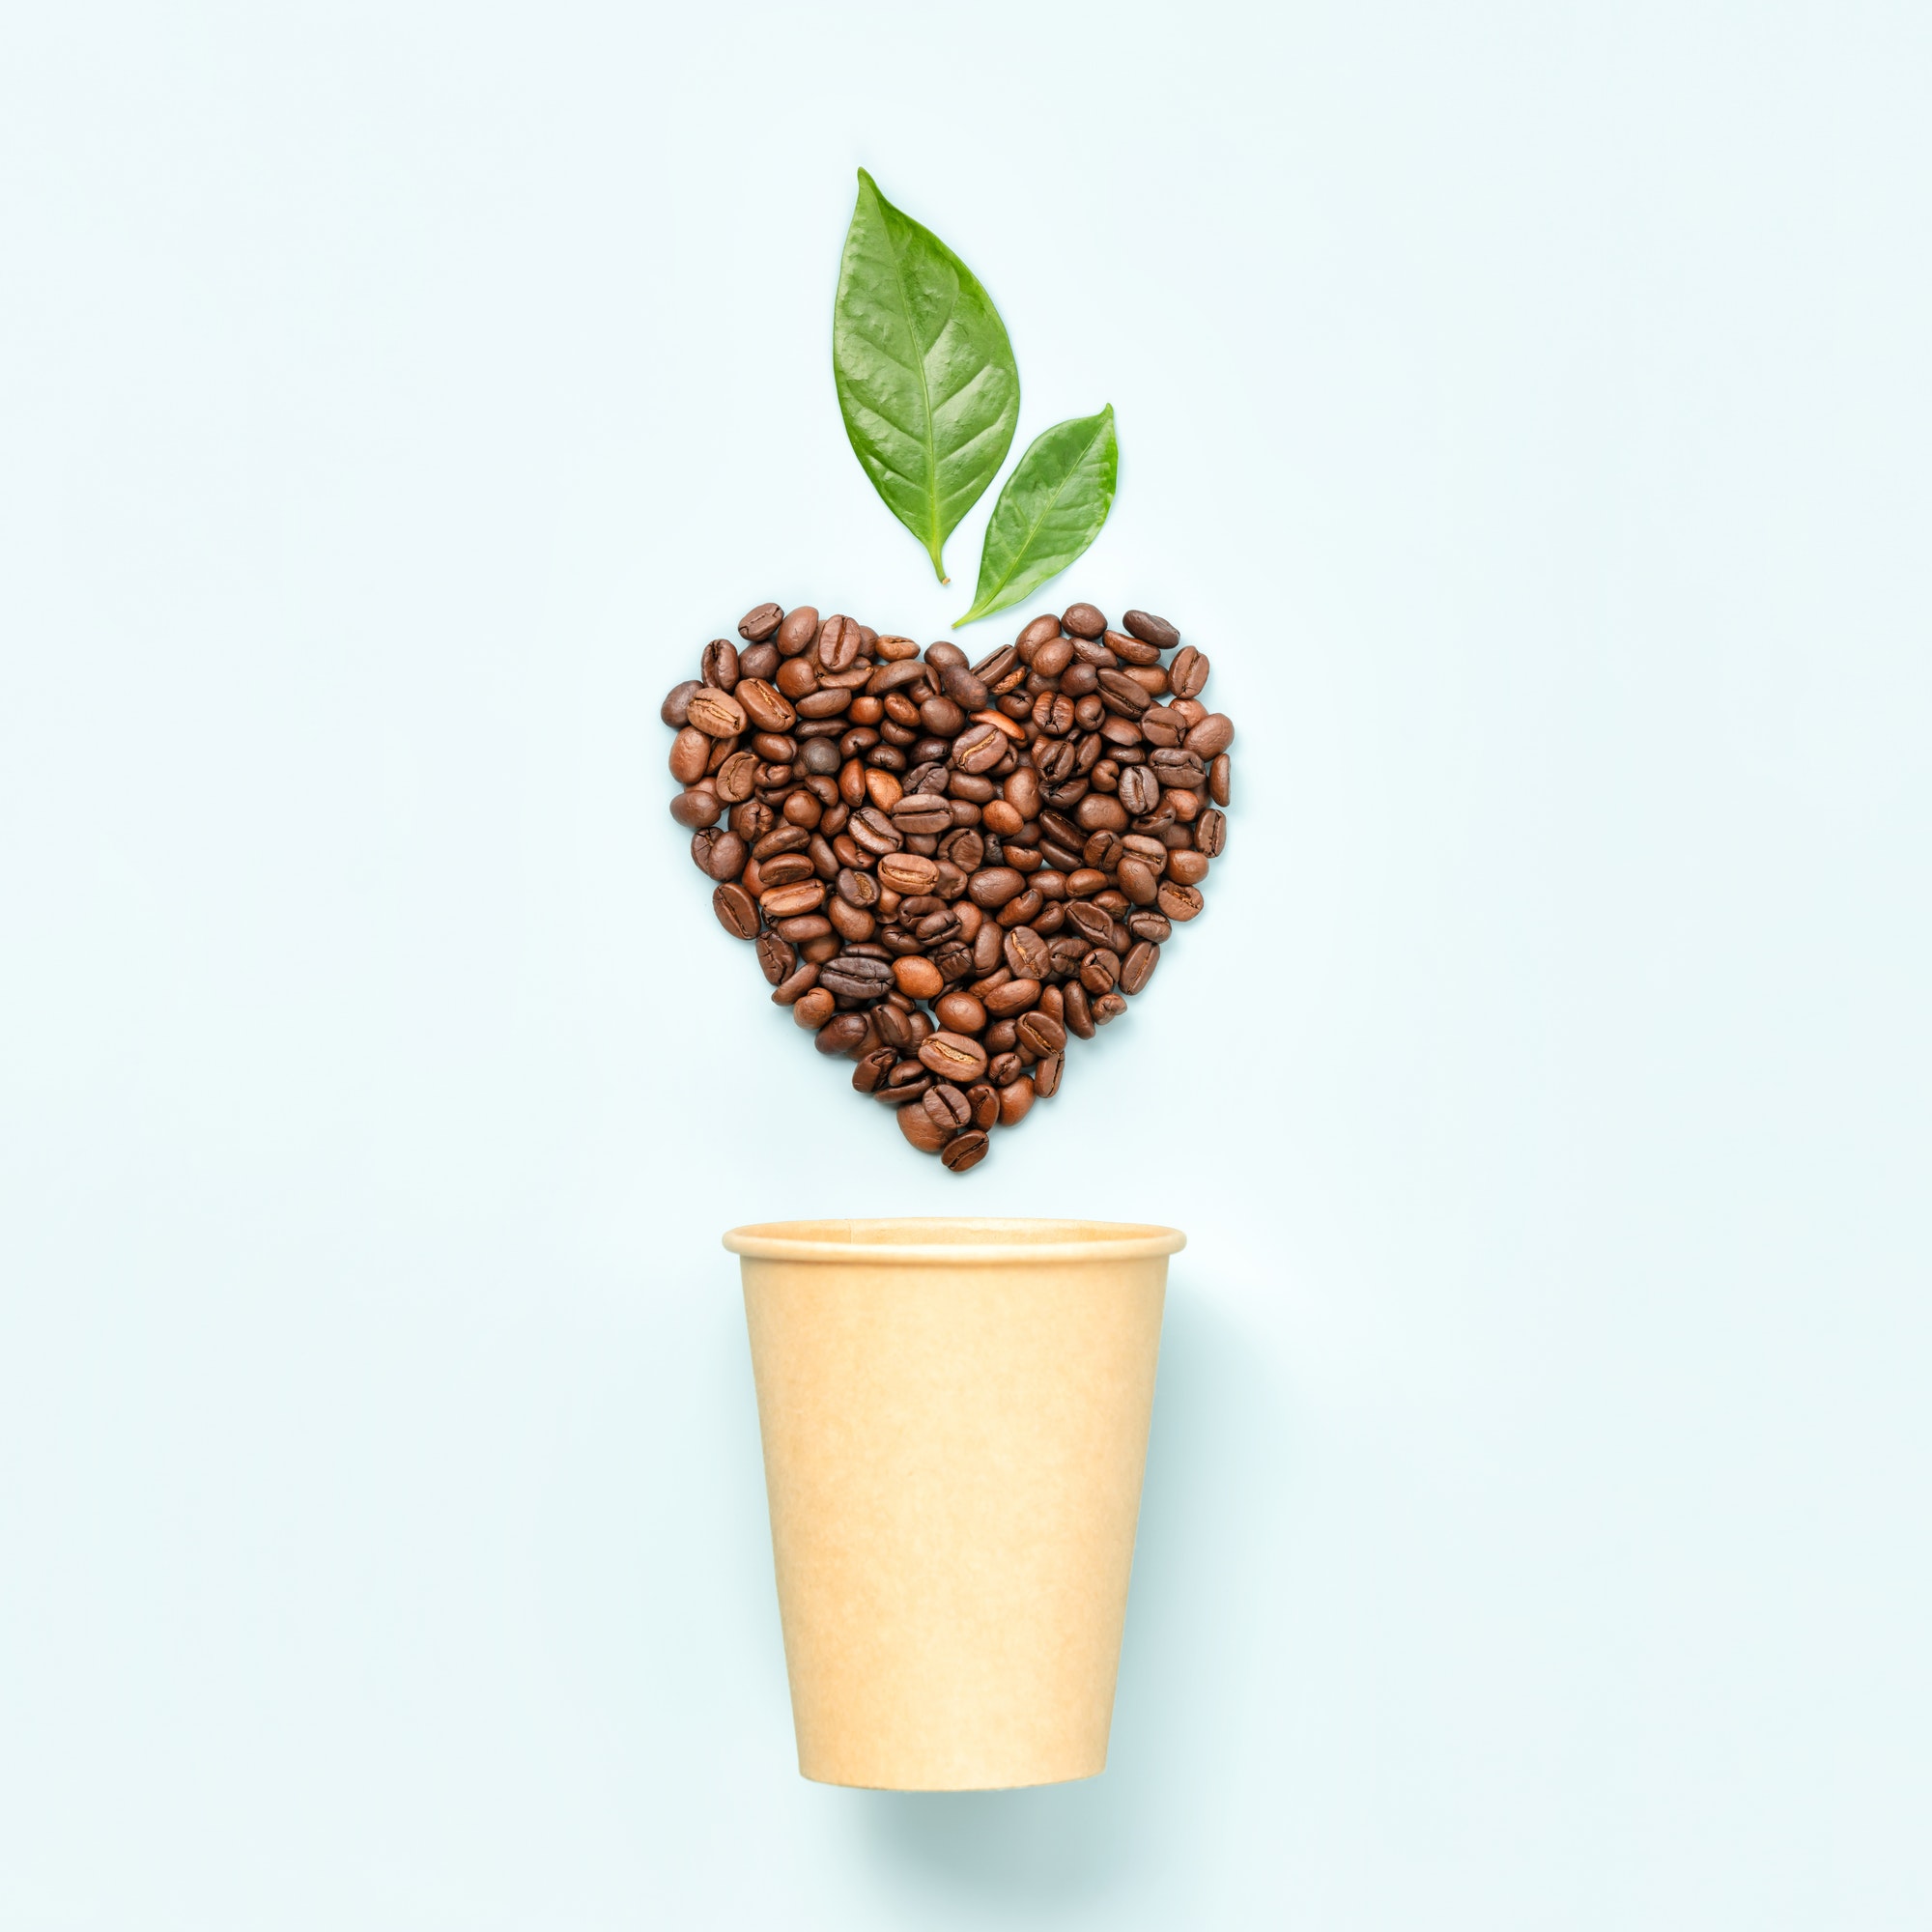 White coffee cup and coffee beans in shape of heart on white background